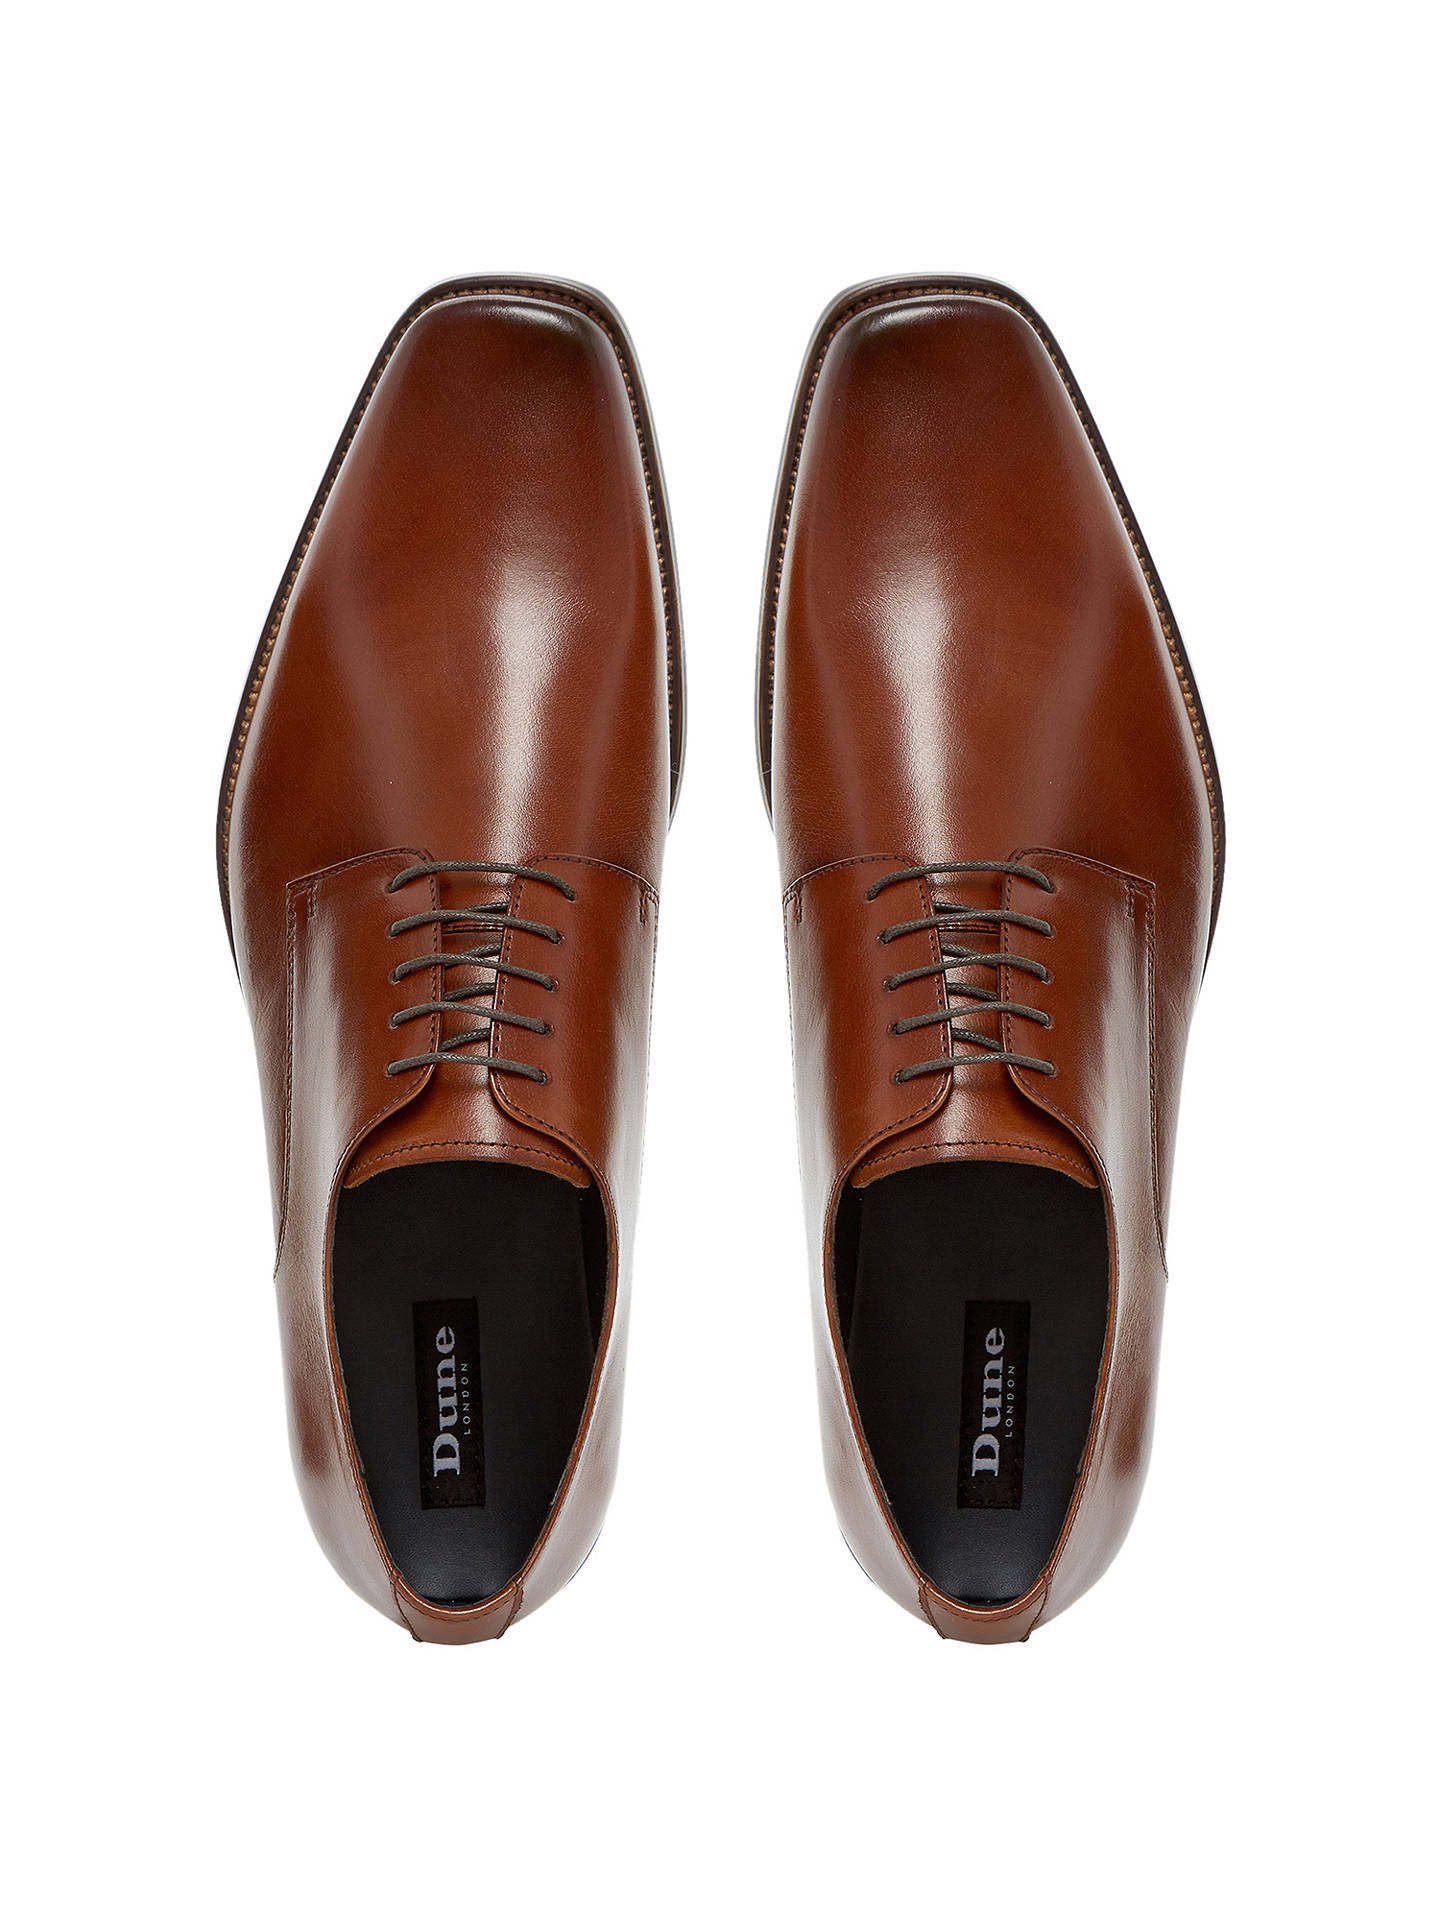 Dune Alphabet Square Toe Leather Derby Shoes at John Lewis & Partners